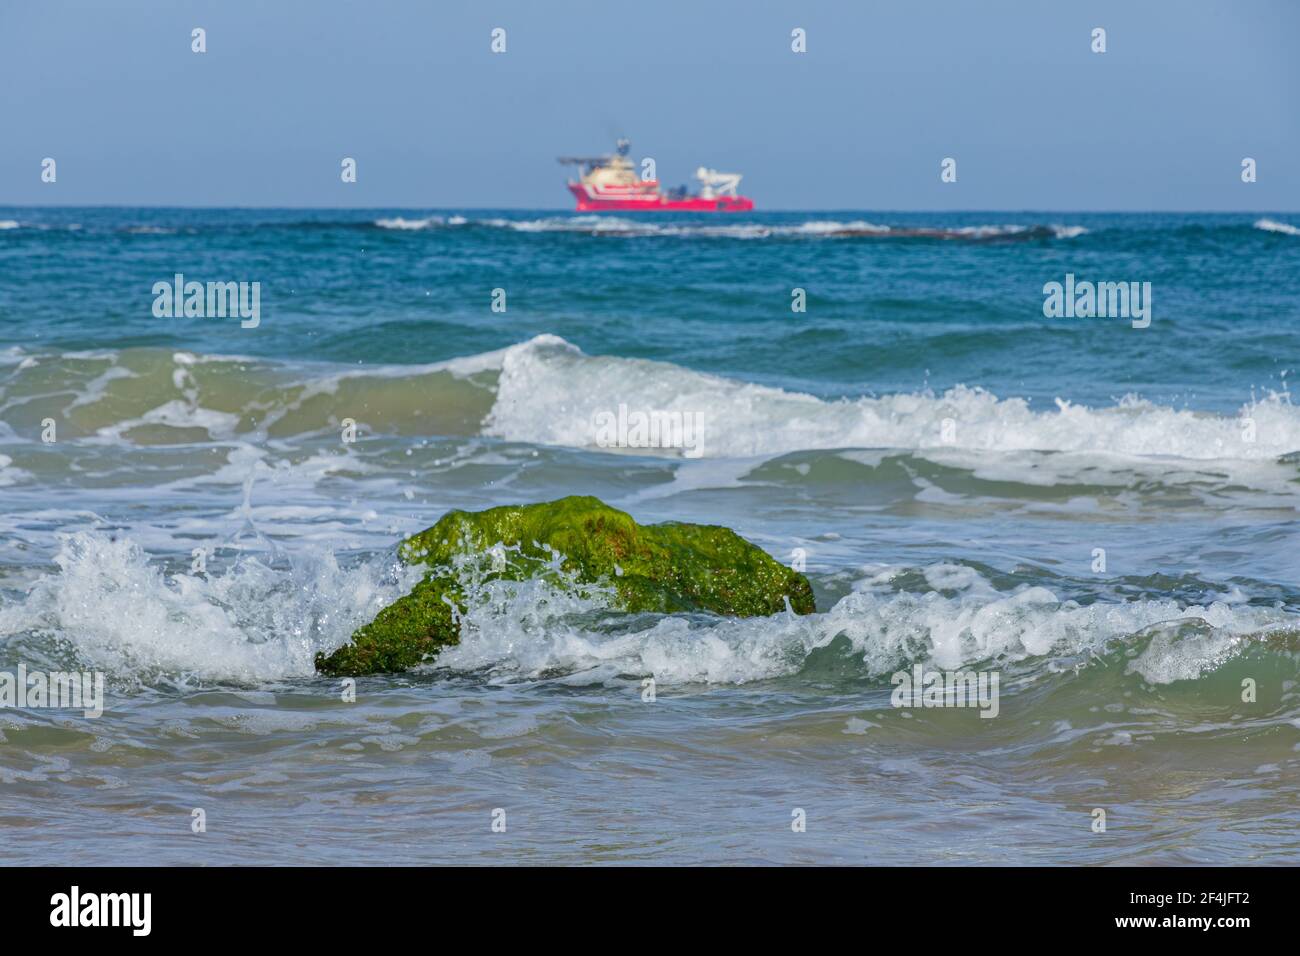 Low tide. A stone covered with seaweed. Waves, sea vessel on the horizon Stock Photo